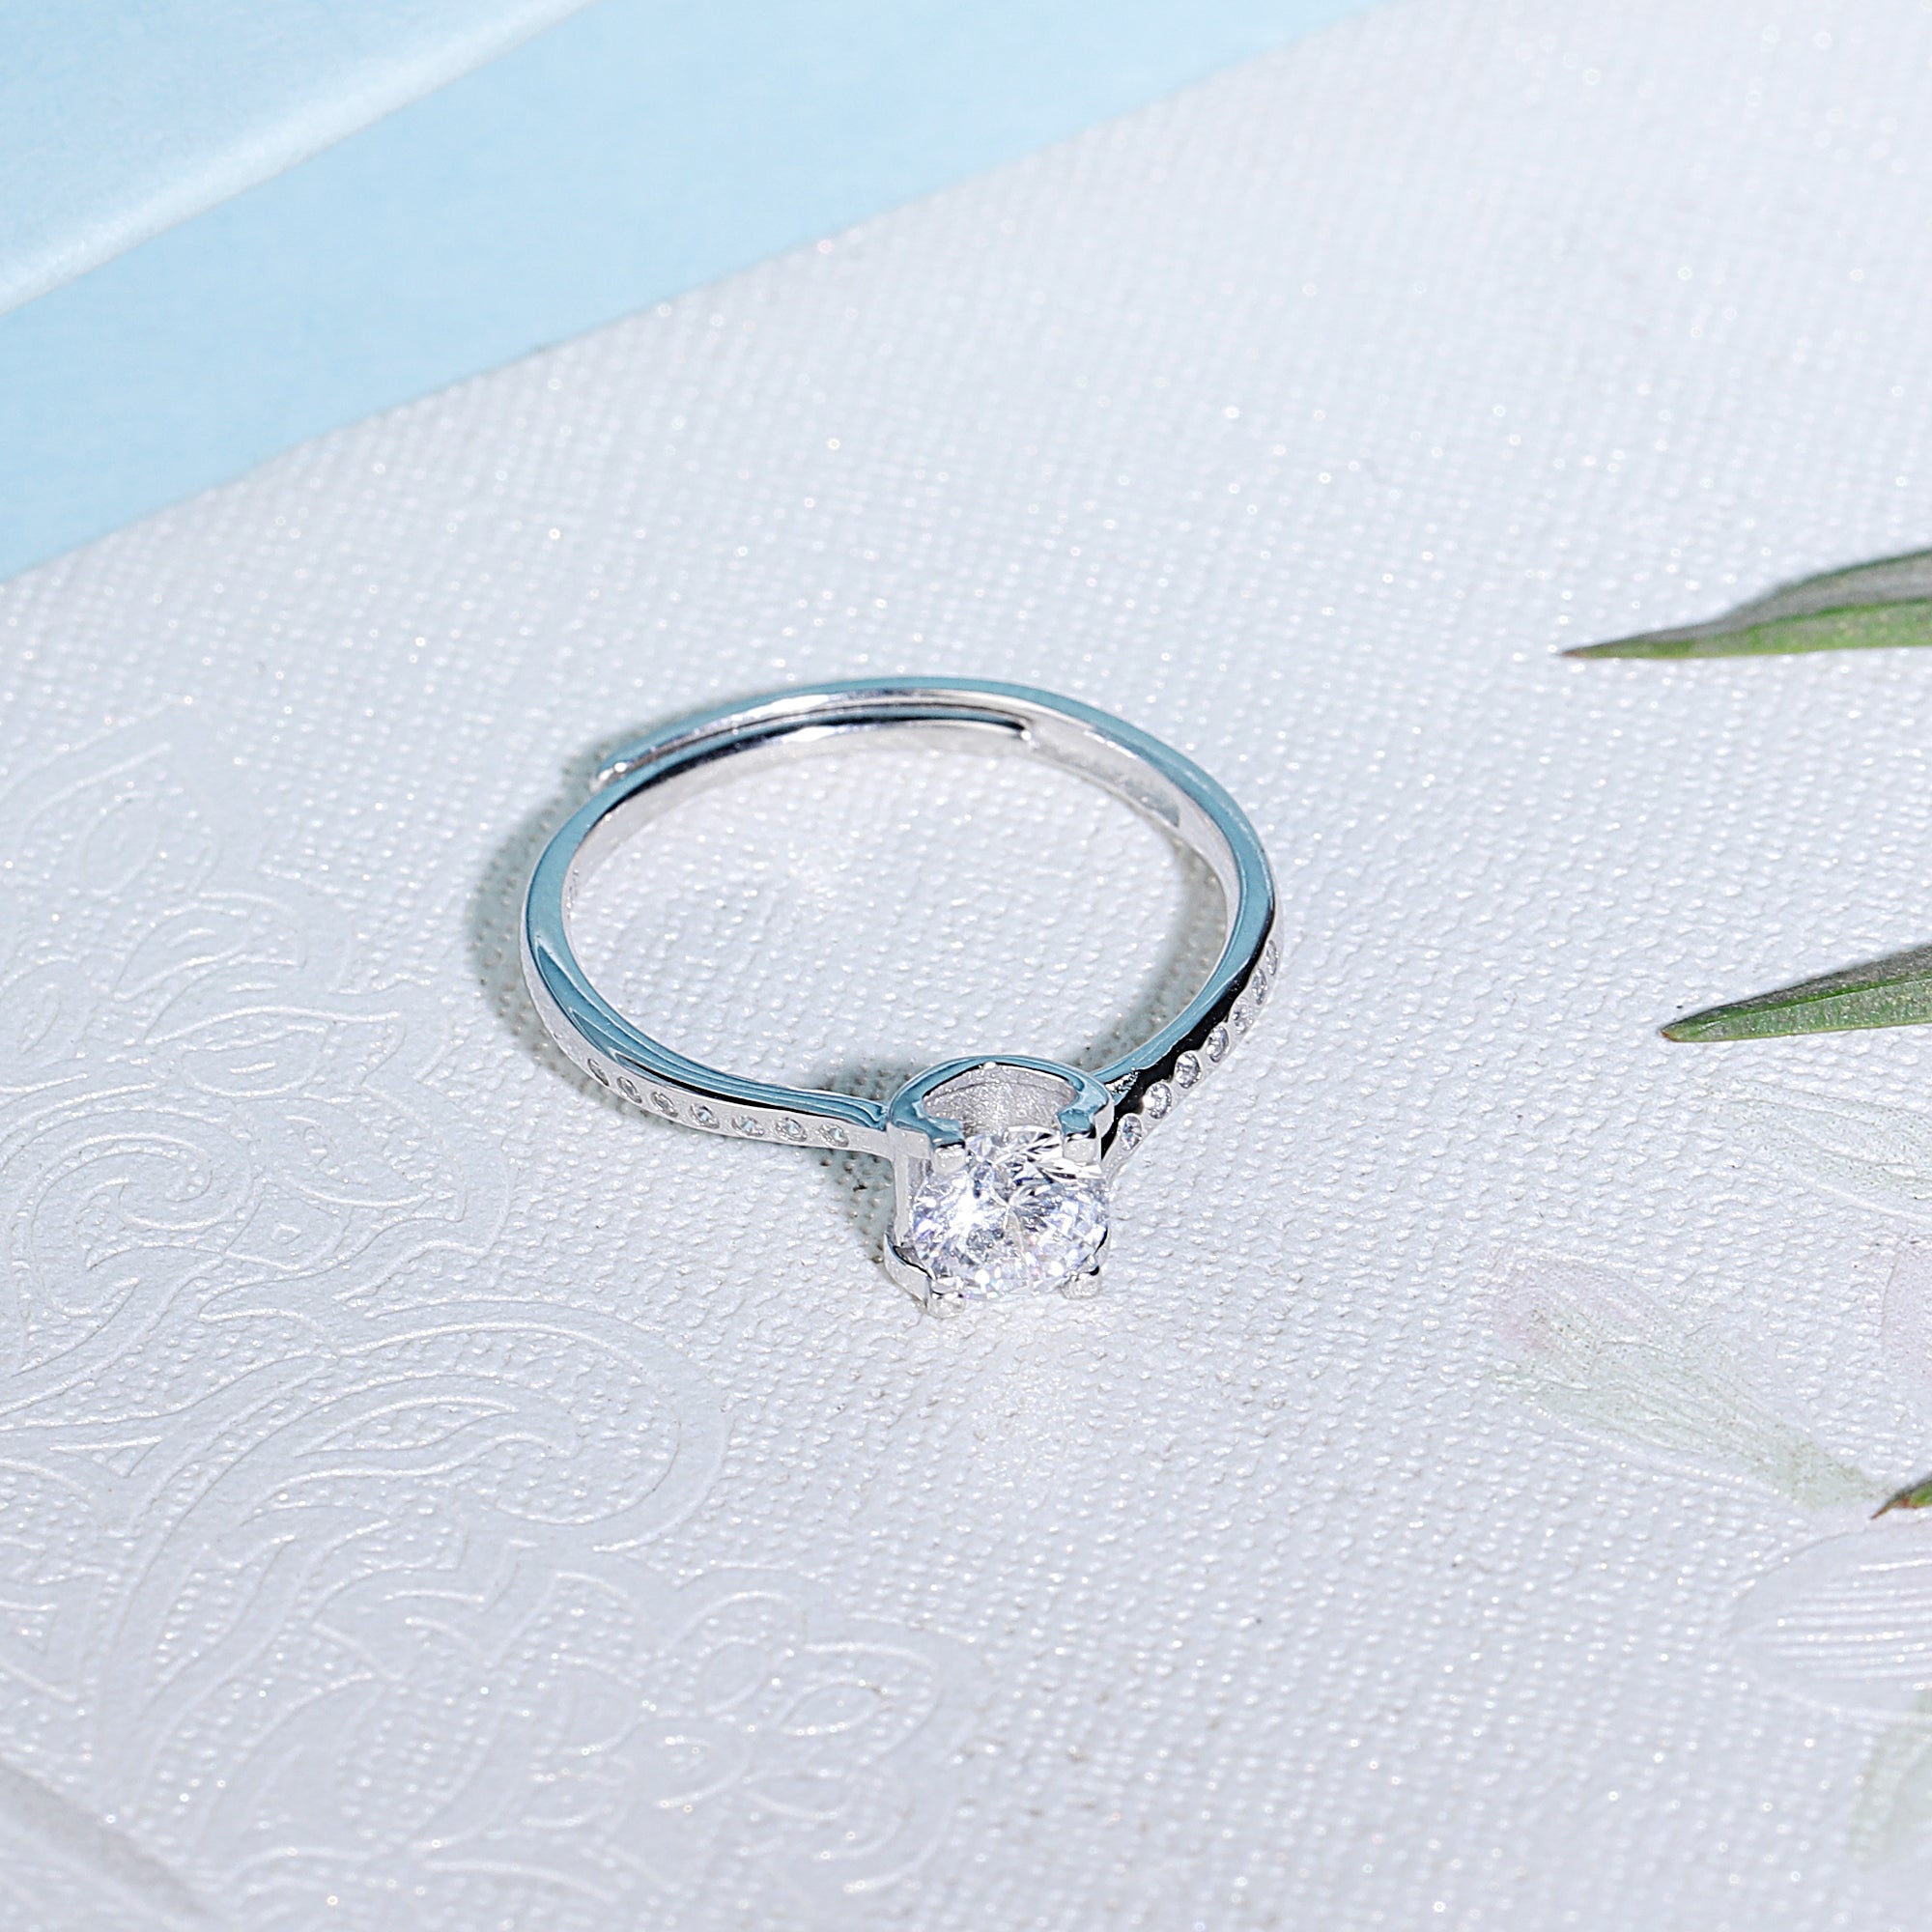 Classic diamond ring with adjustable size